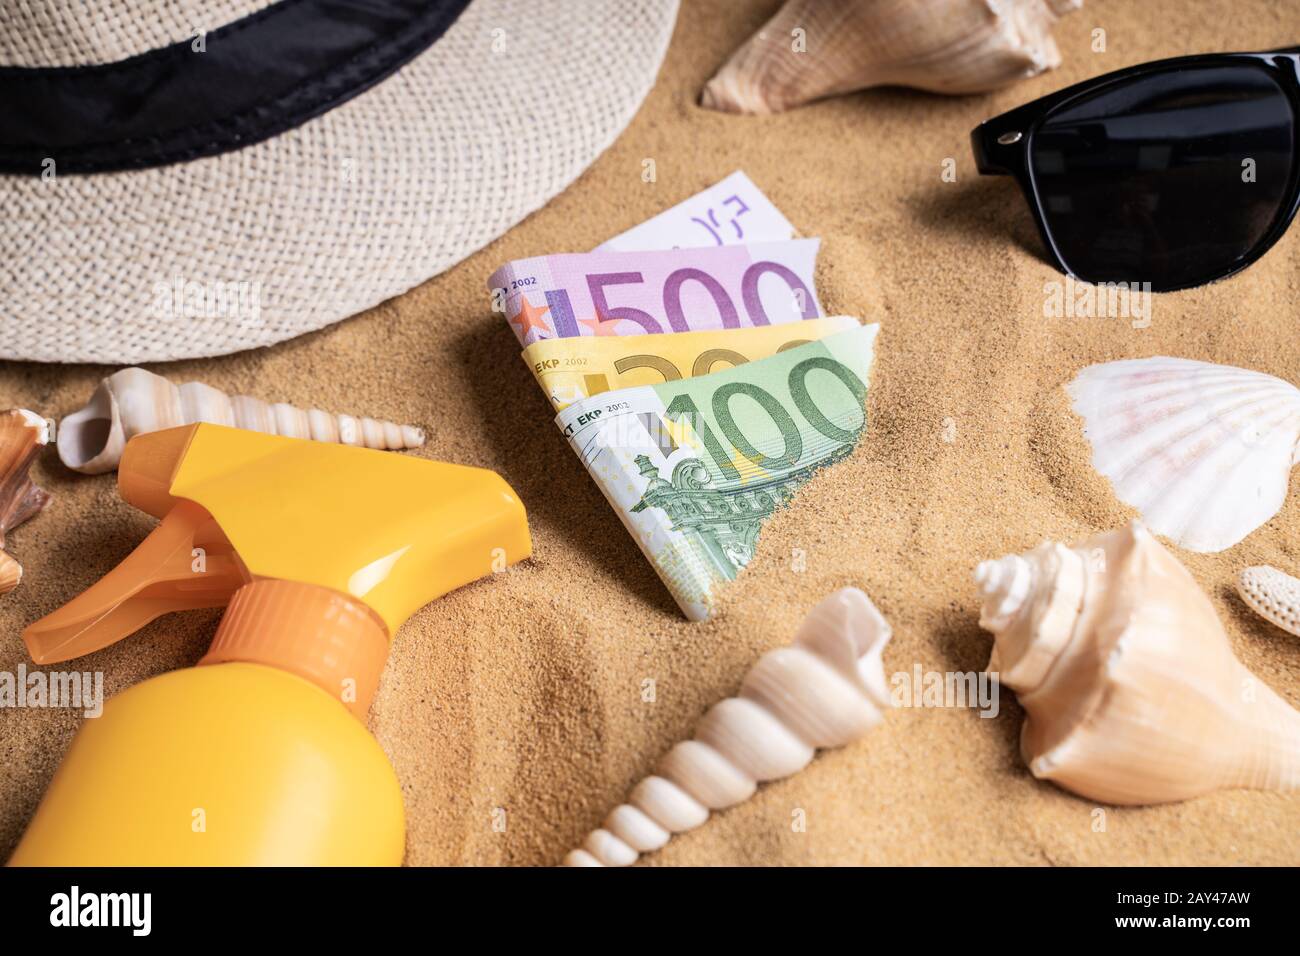 Euros In Sand On Beach Surrounded By Objects Stock Photo